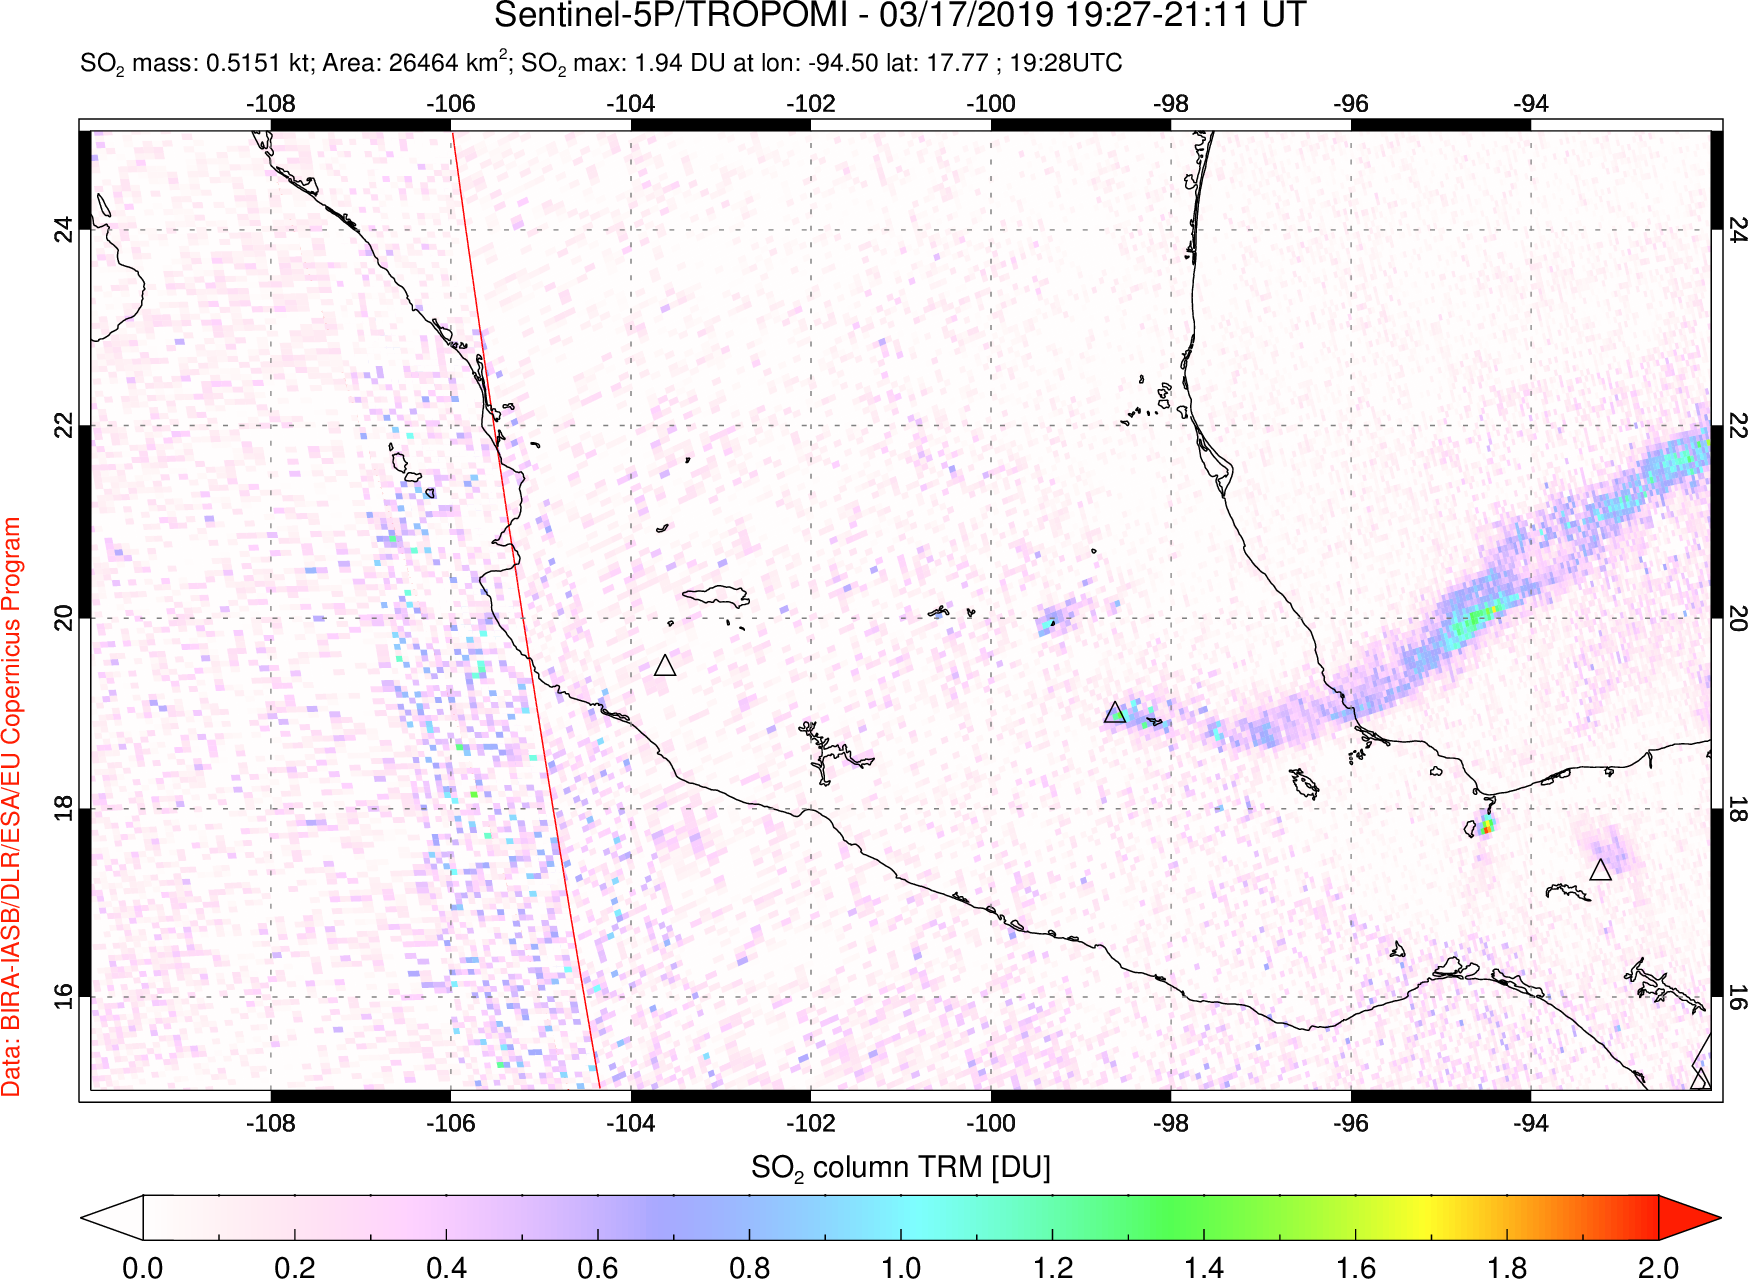 A sulfur dioxide image over Mexico on Mar 17, 2019.